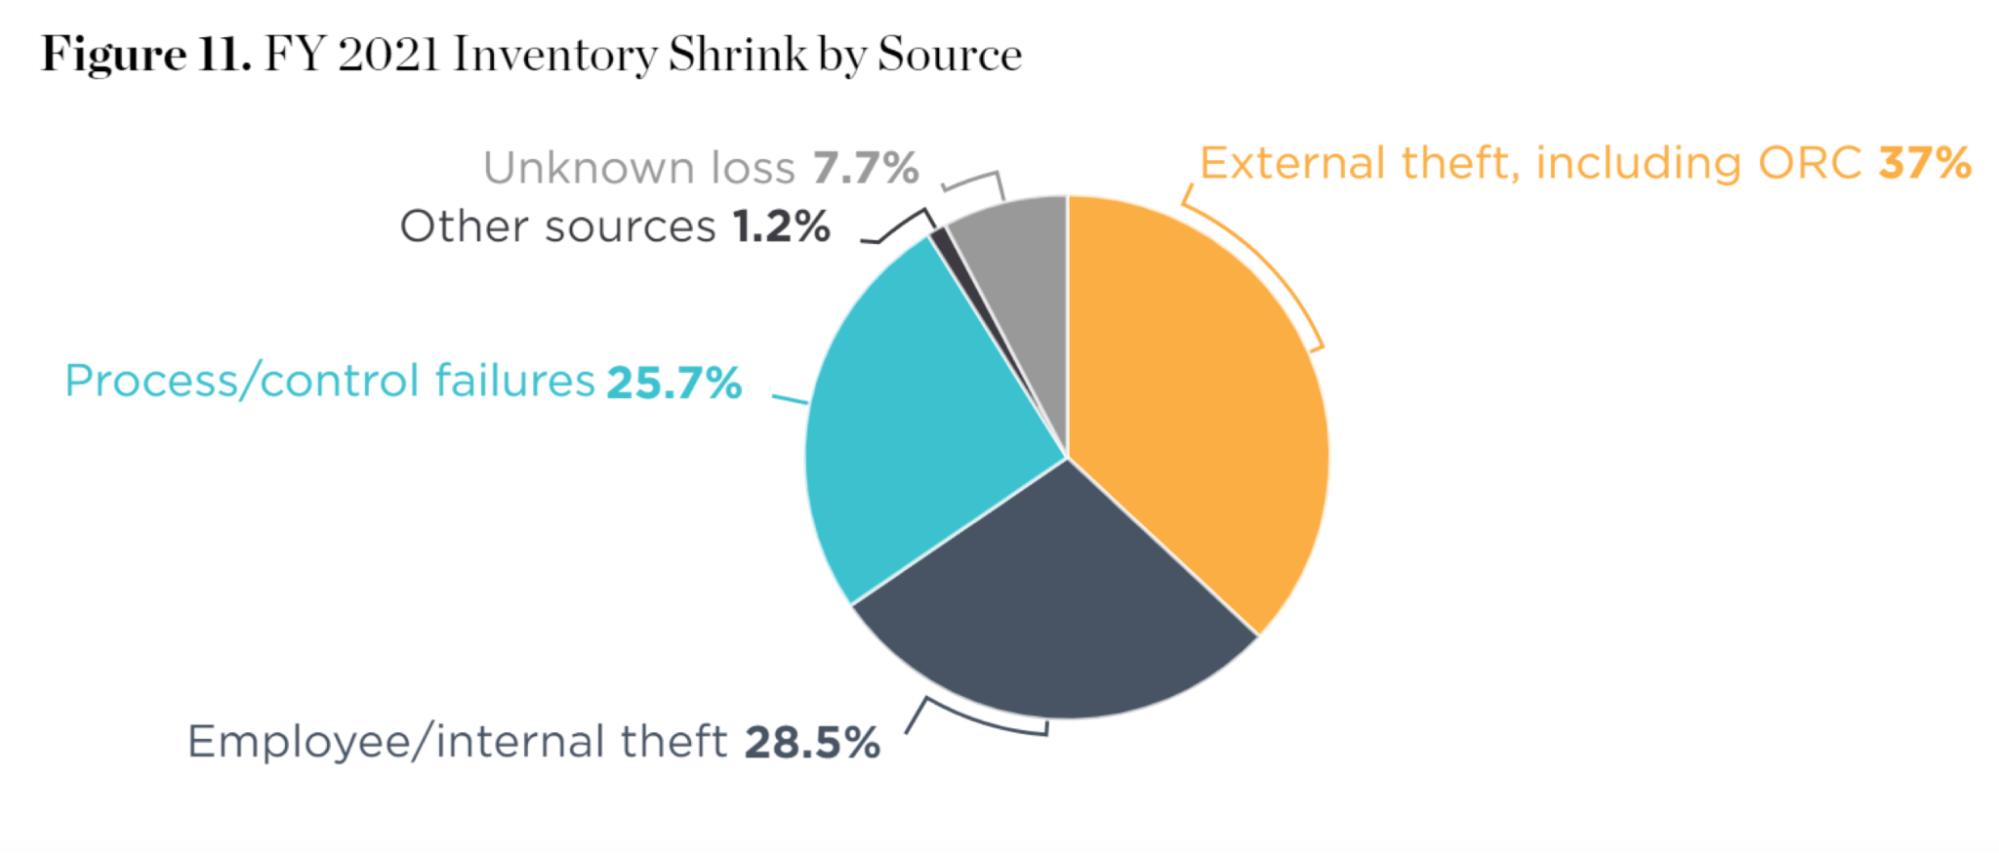 Sources of retail shrinkage in 2021